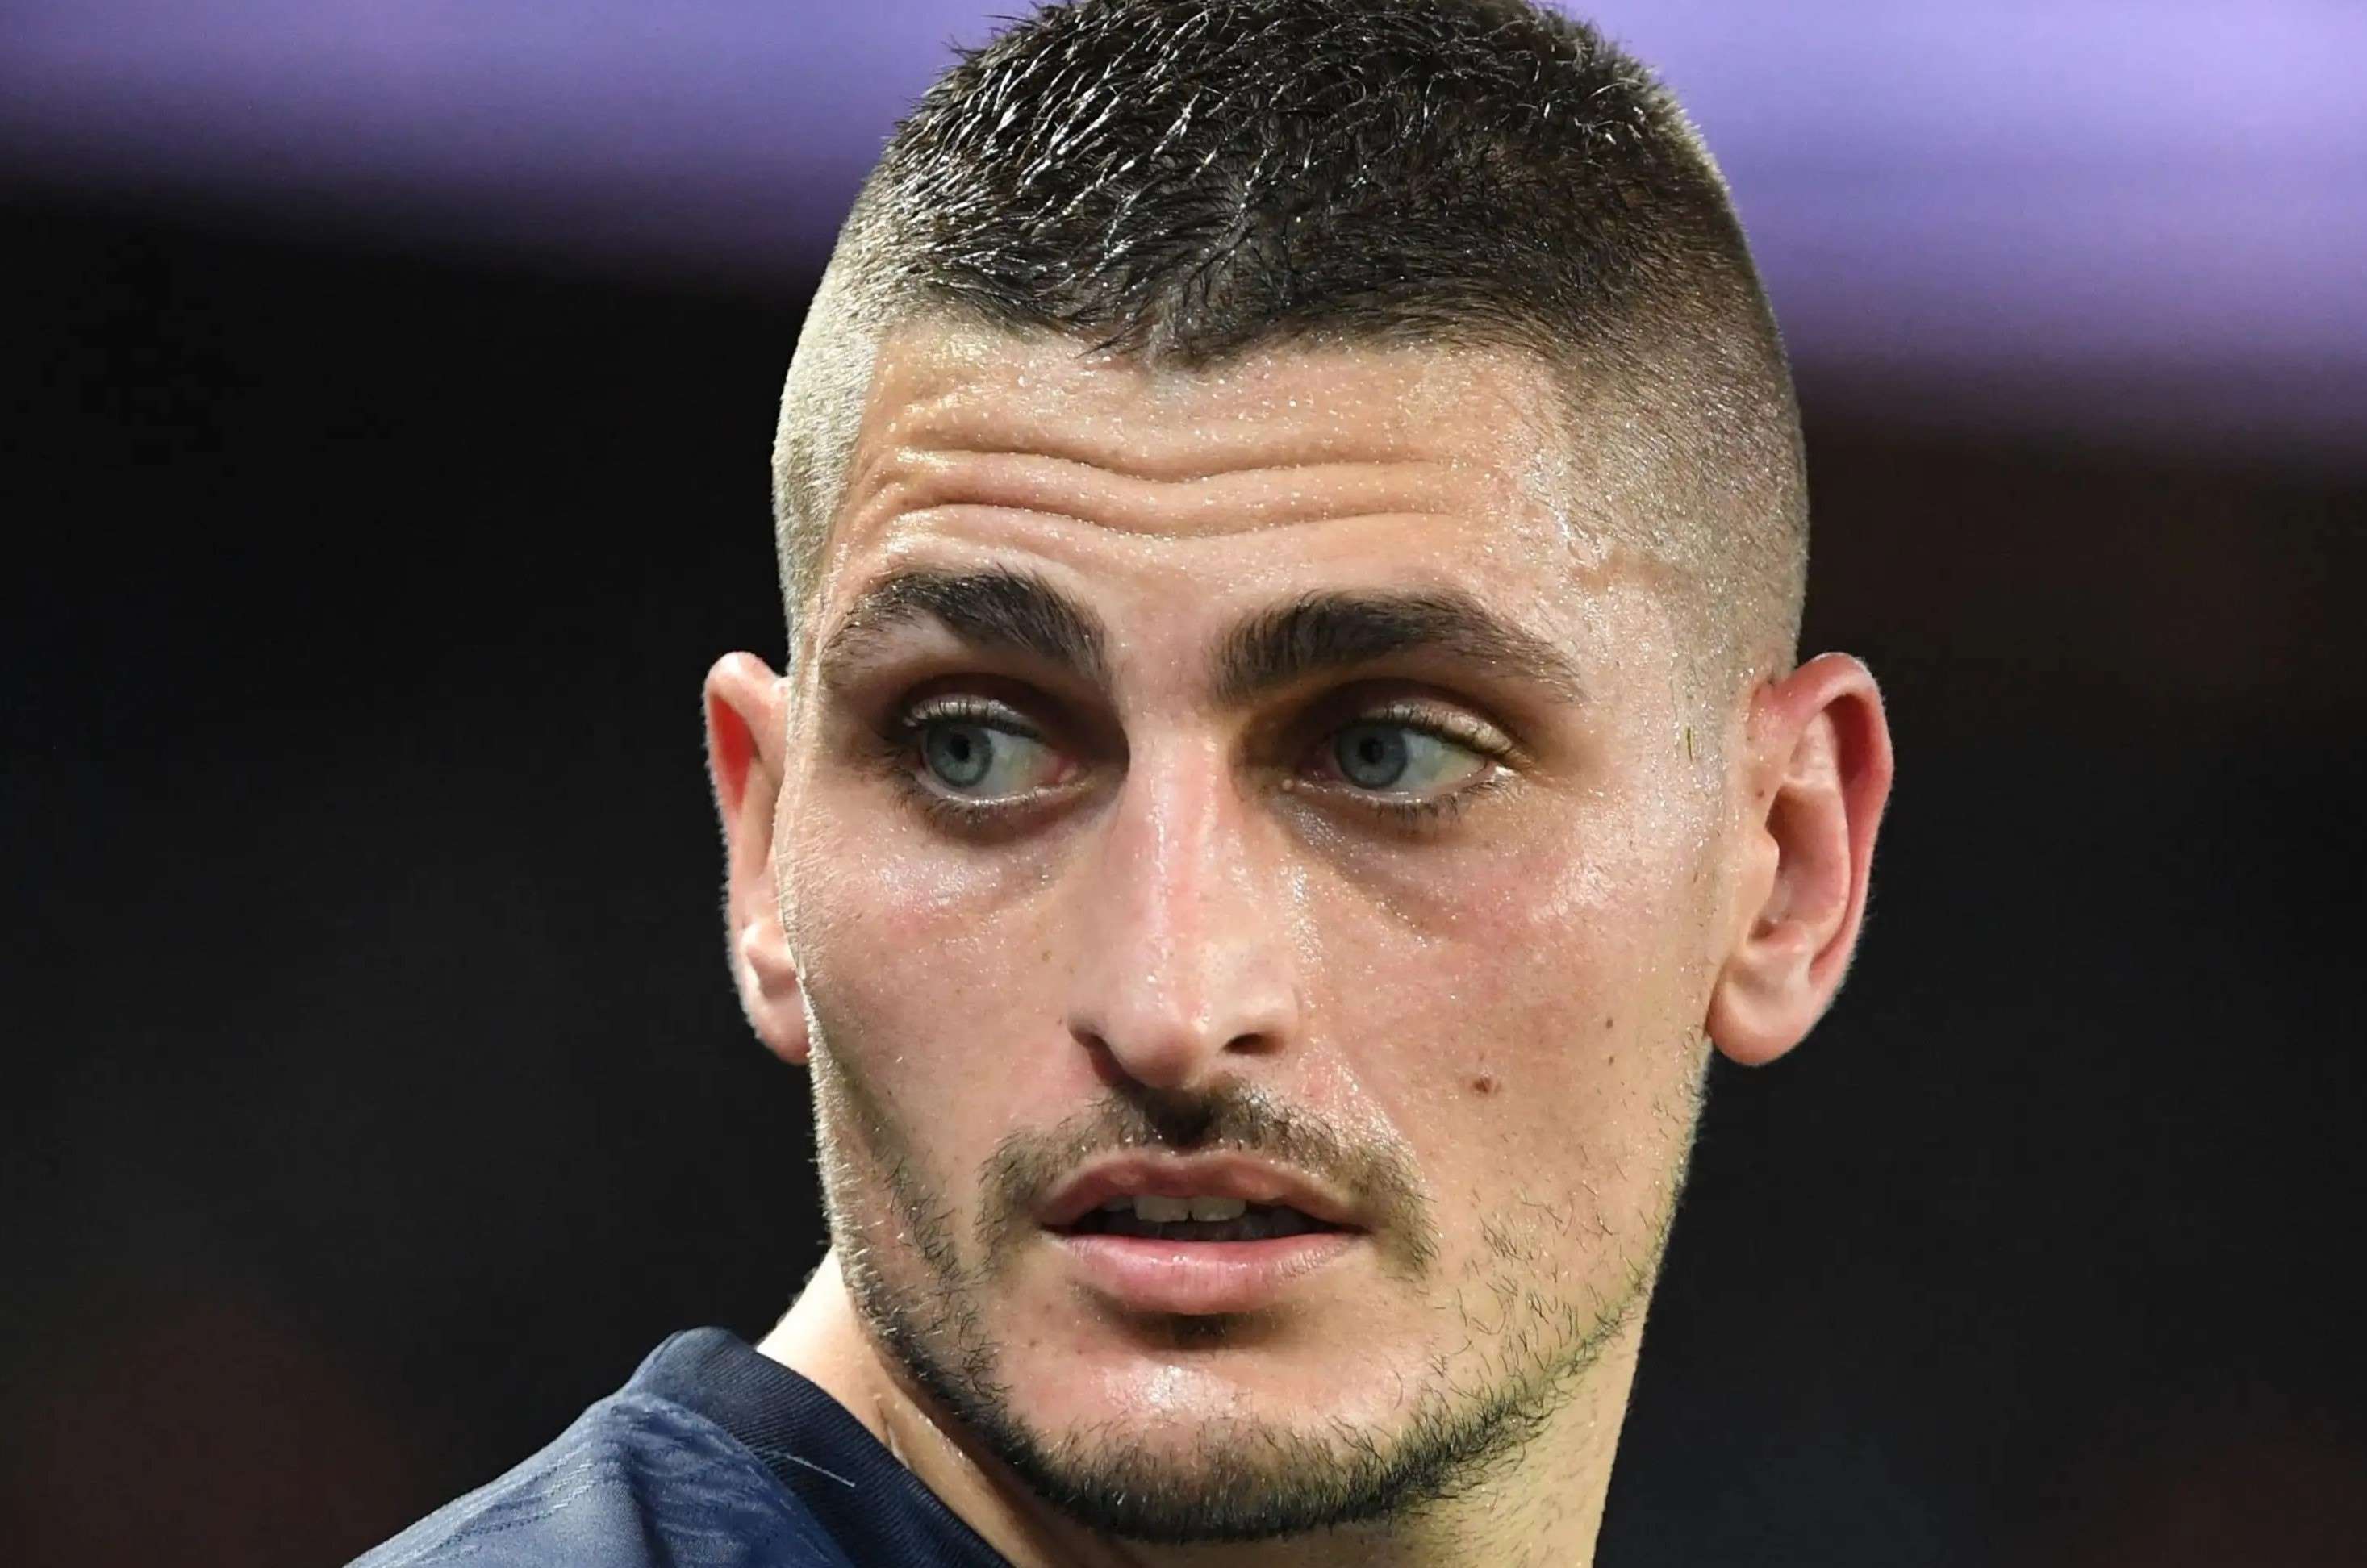 17 Astonishing Facts About Marco Verratti - Facts.net